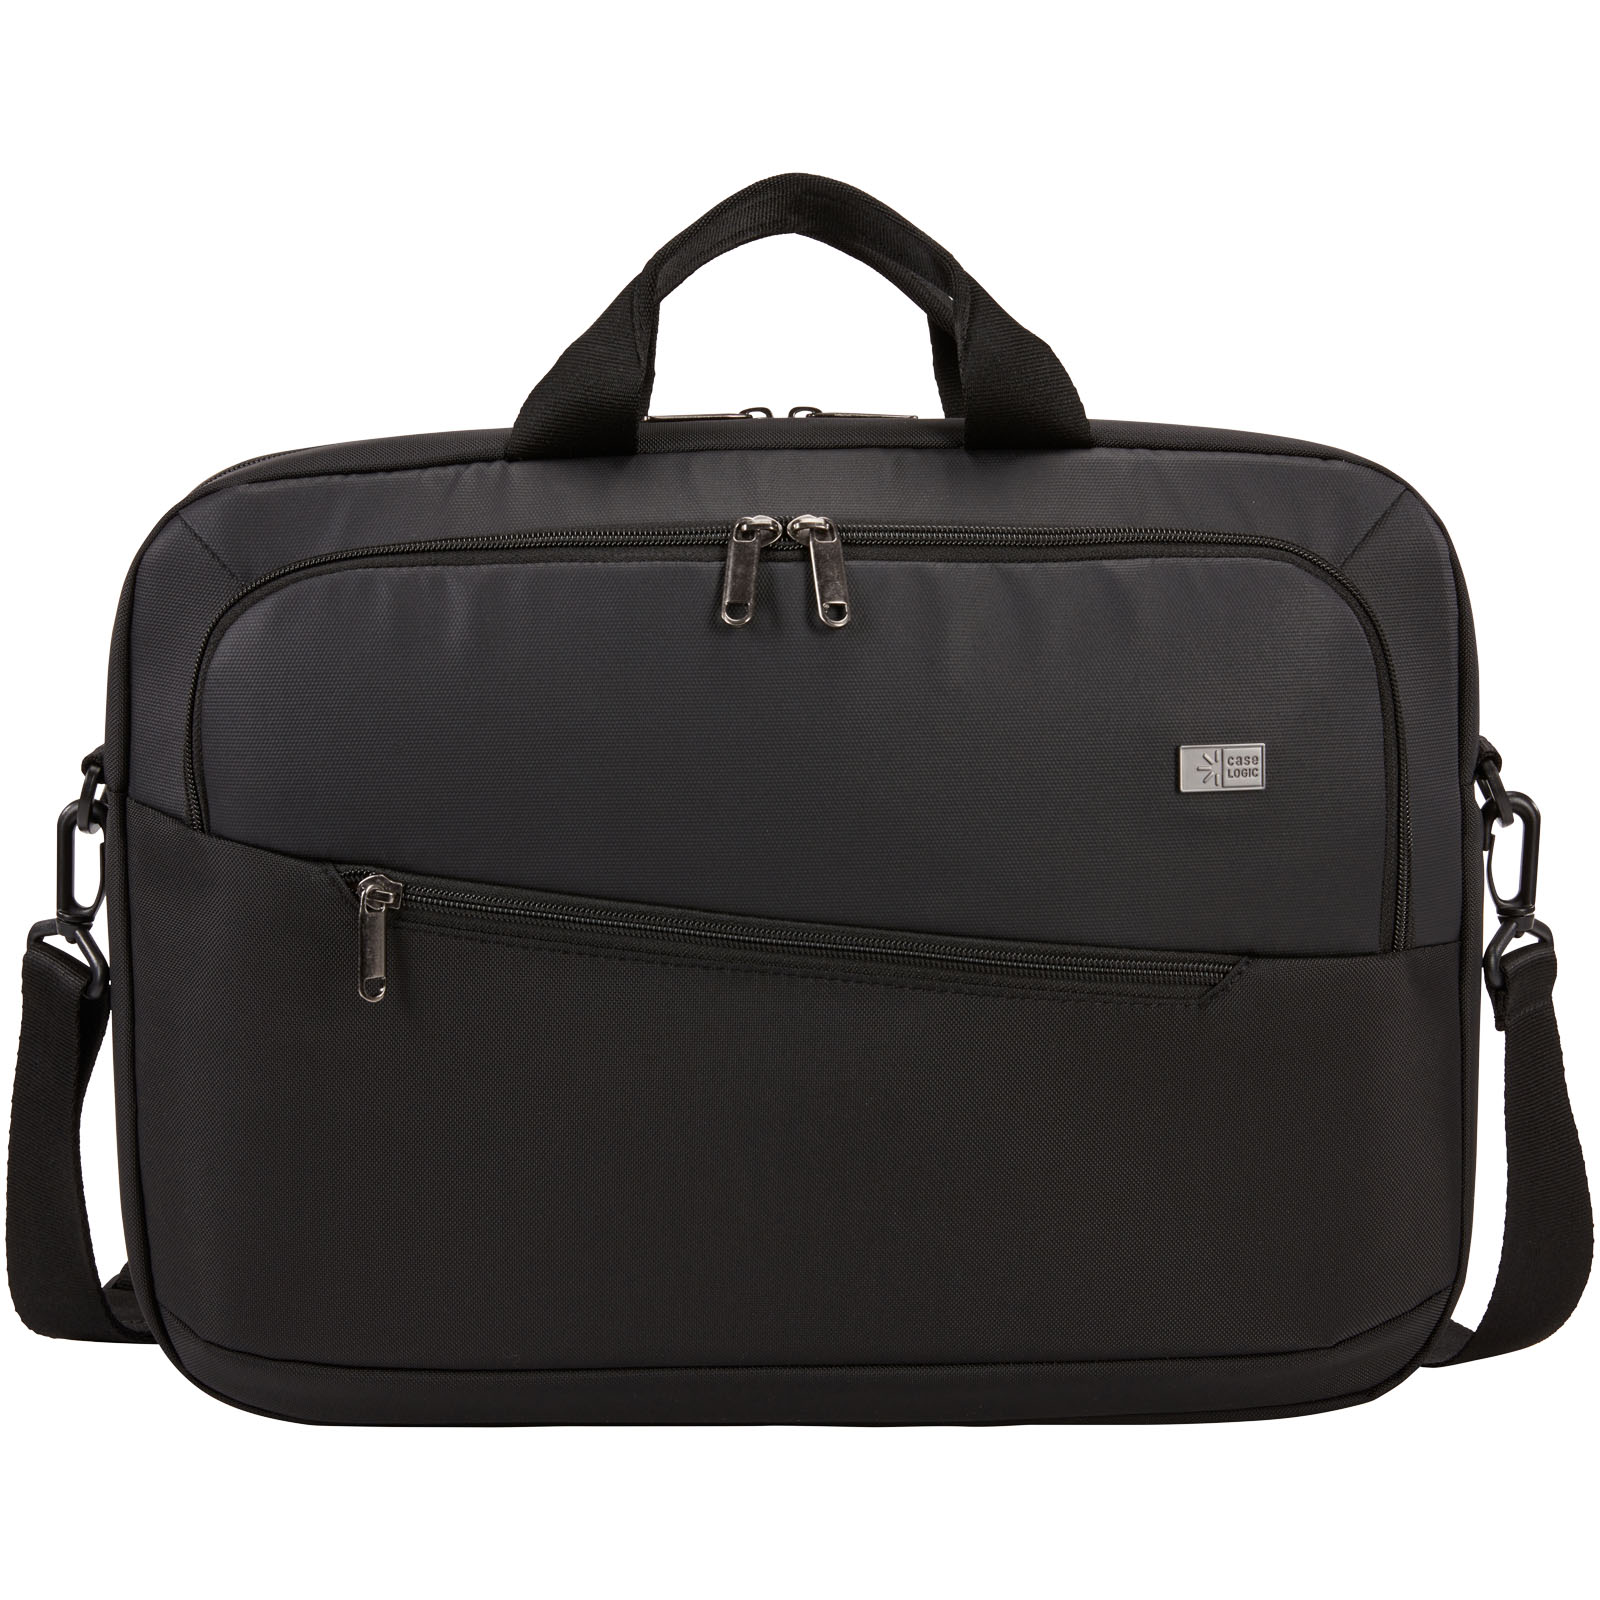 Advertising Conference bags - Case Logic Propel 15.6